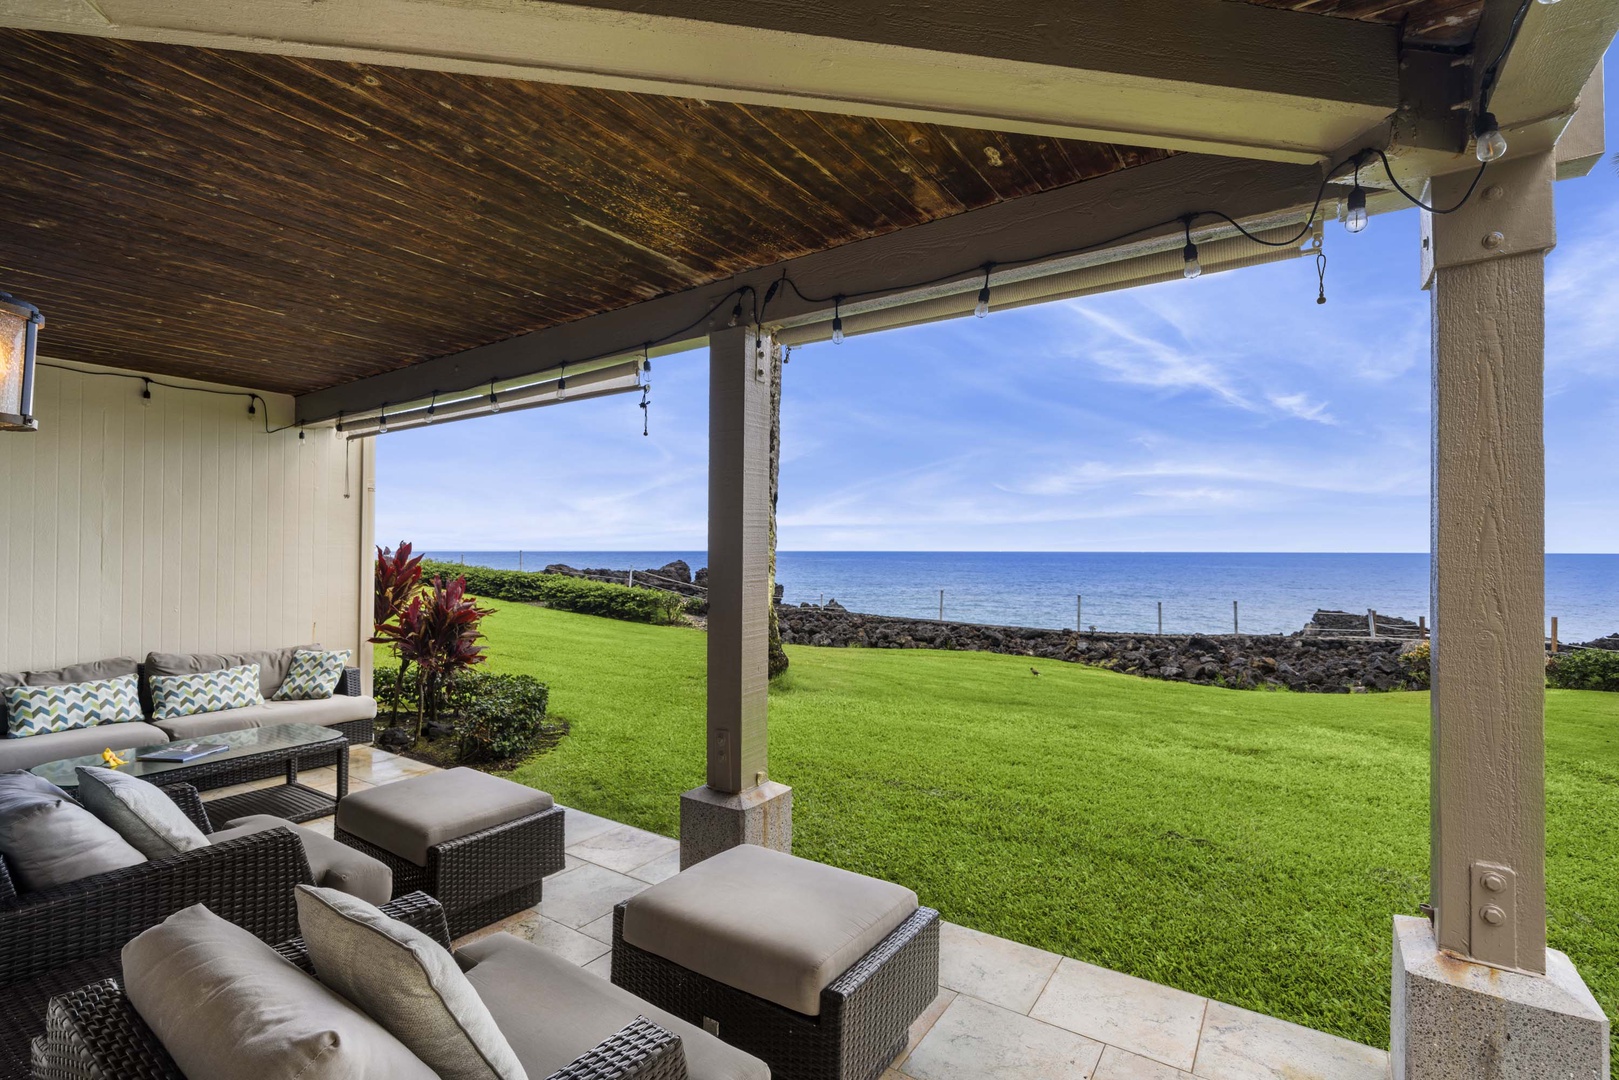 Kailua Kona Vacation Rentals, Keauhou Kona Surf & Racquet 2101 - Sip your morning coffee in front of majestic ocean views at the lanai.